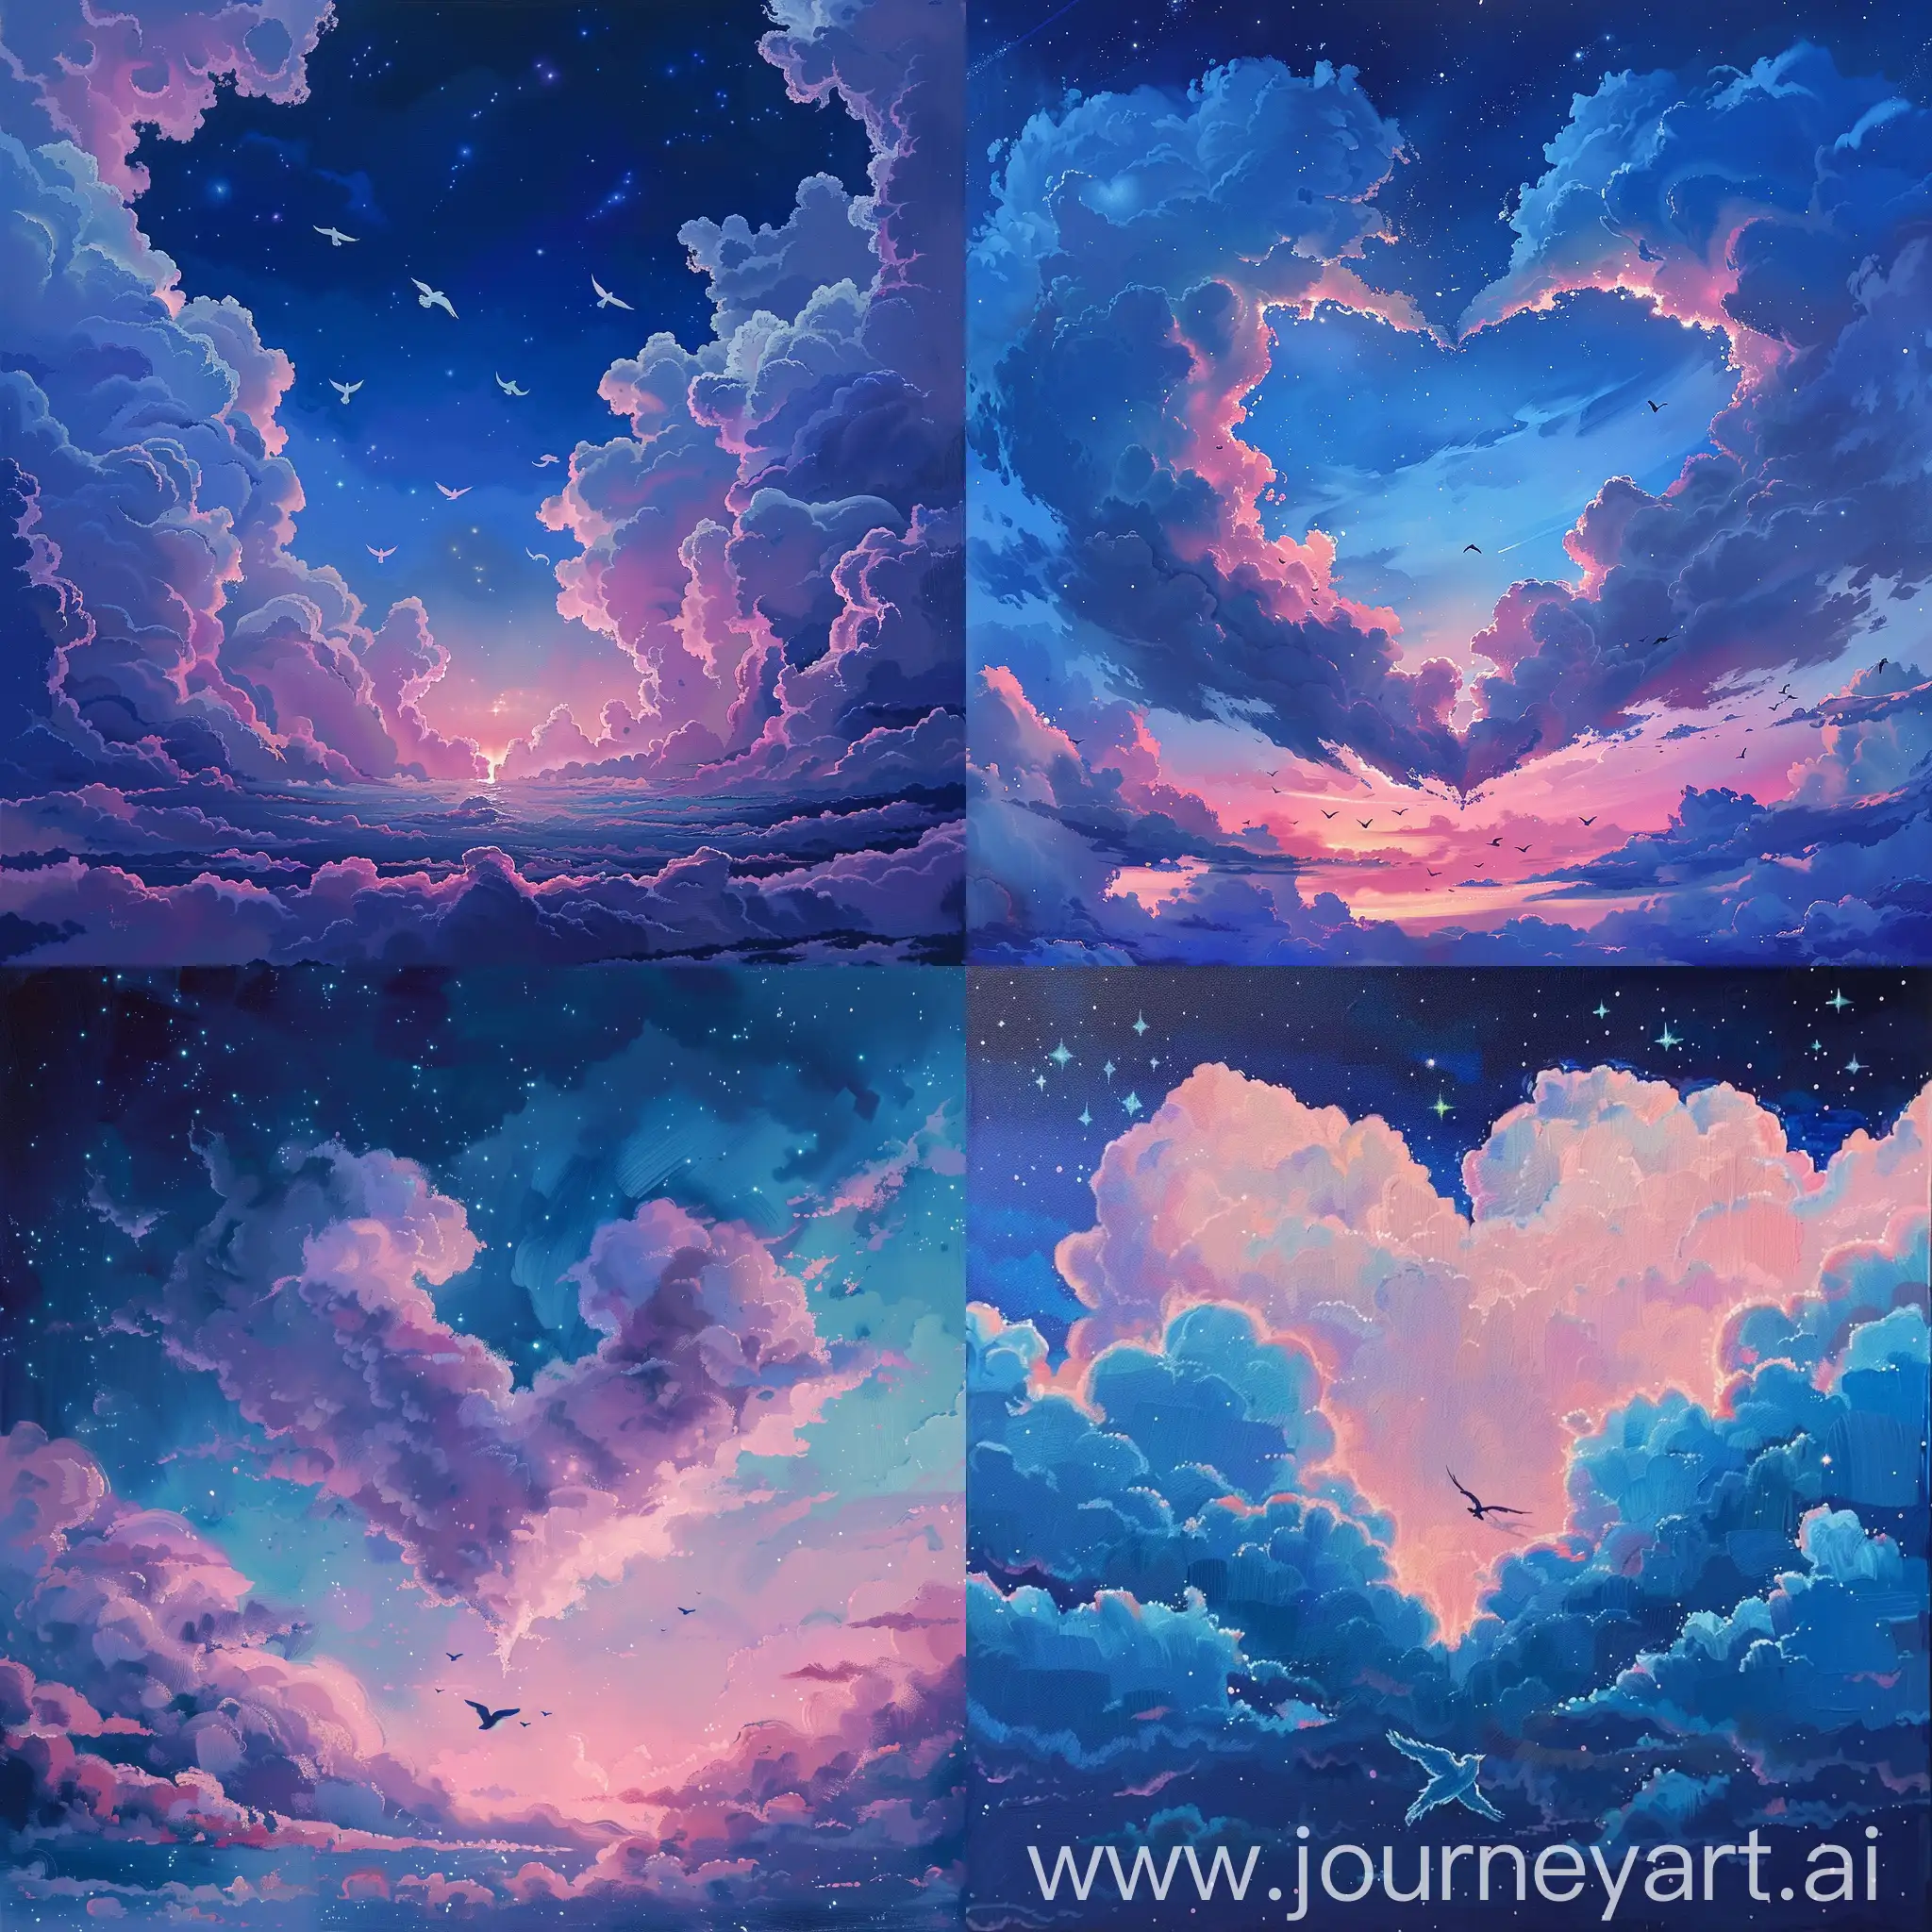 Romantic-Night-Sky-with-Heartshaped-Blue-Clouds-and-Starlight-Birds